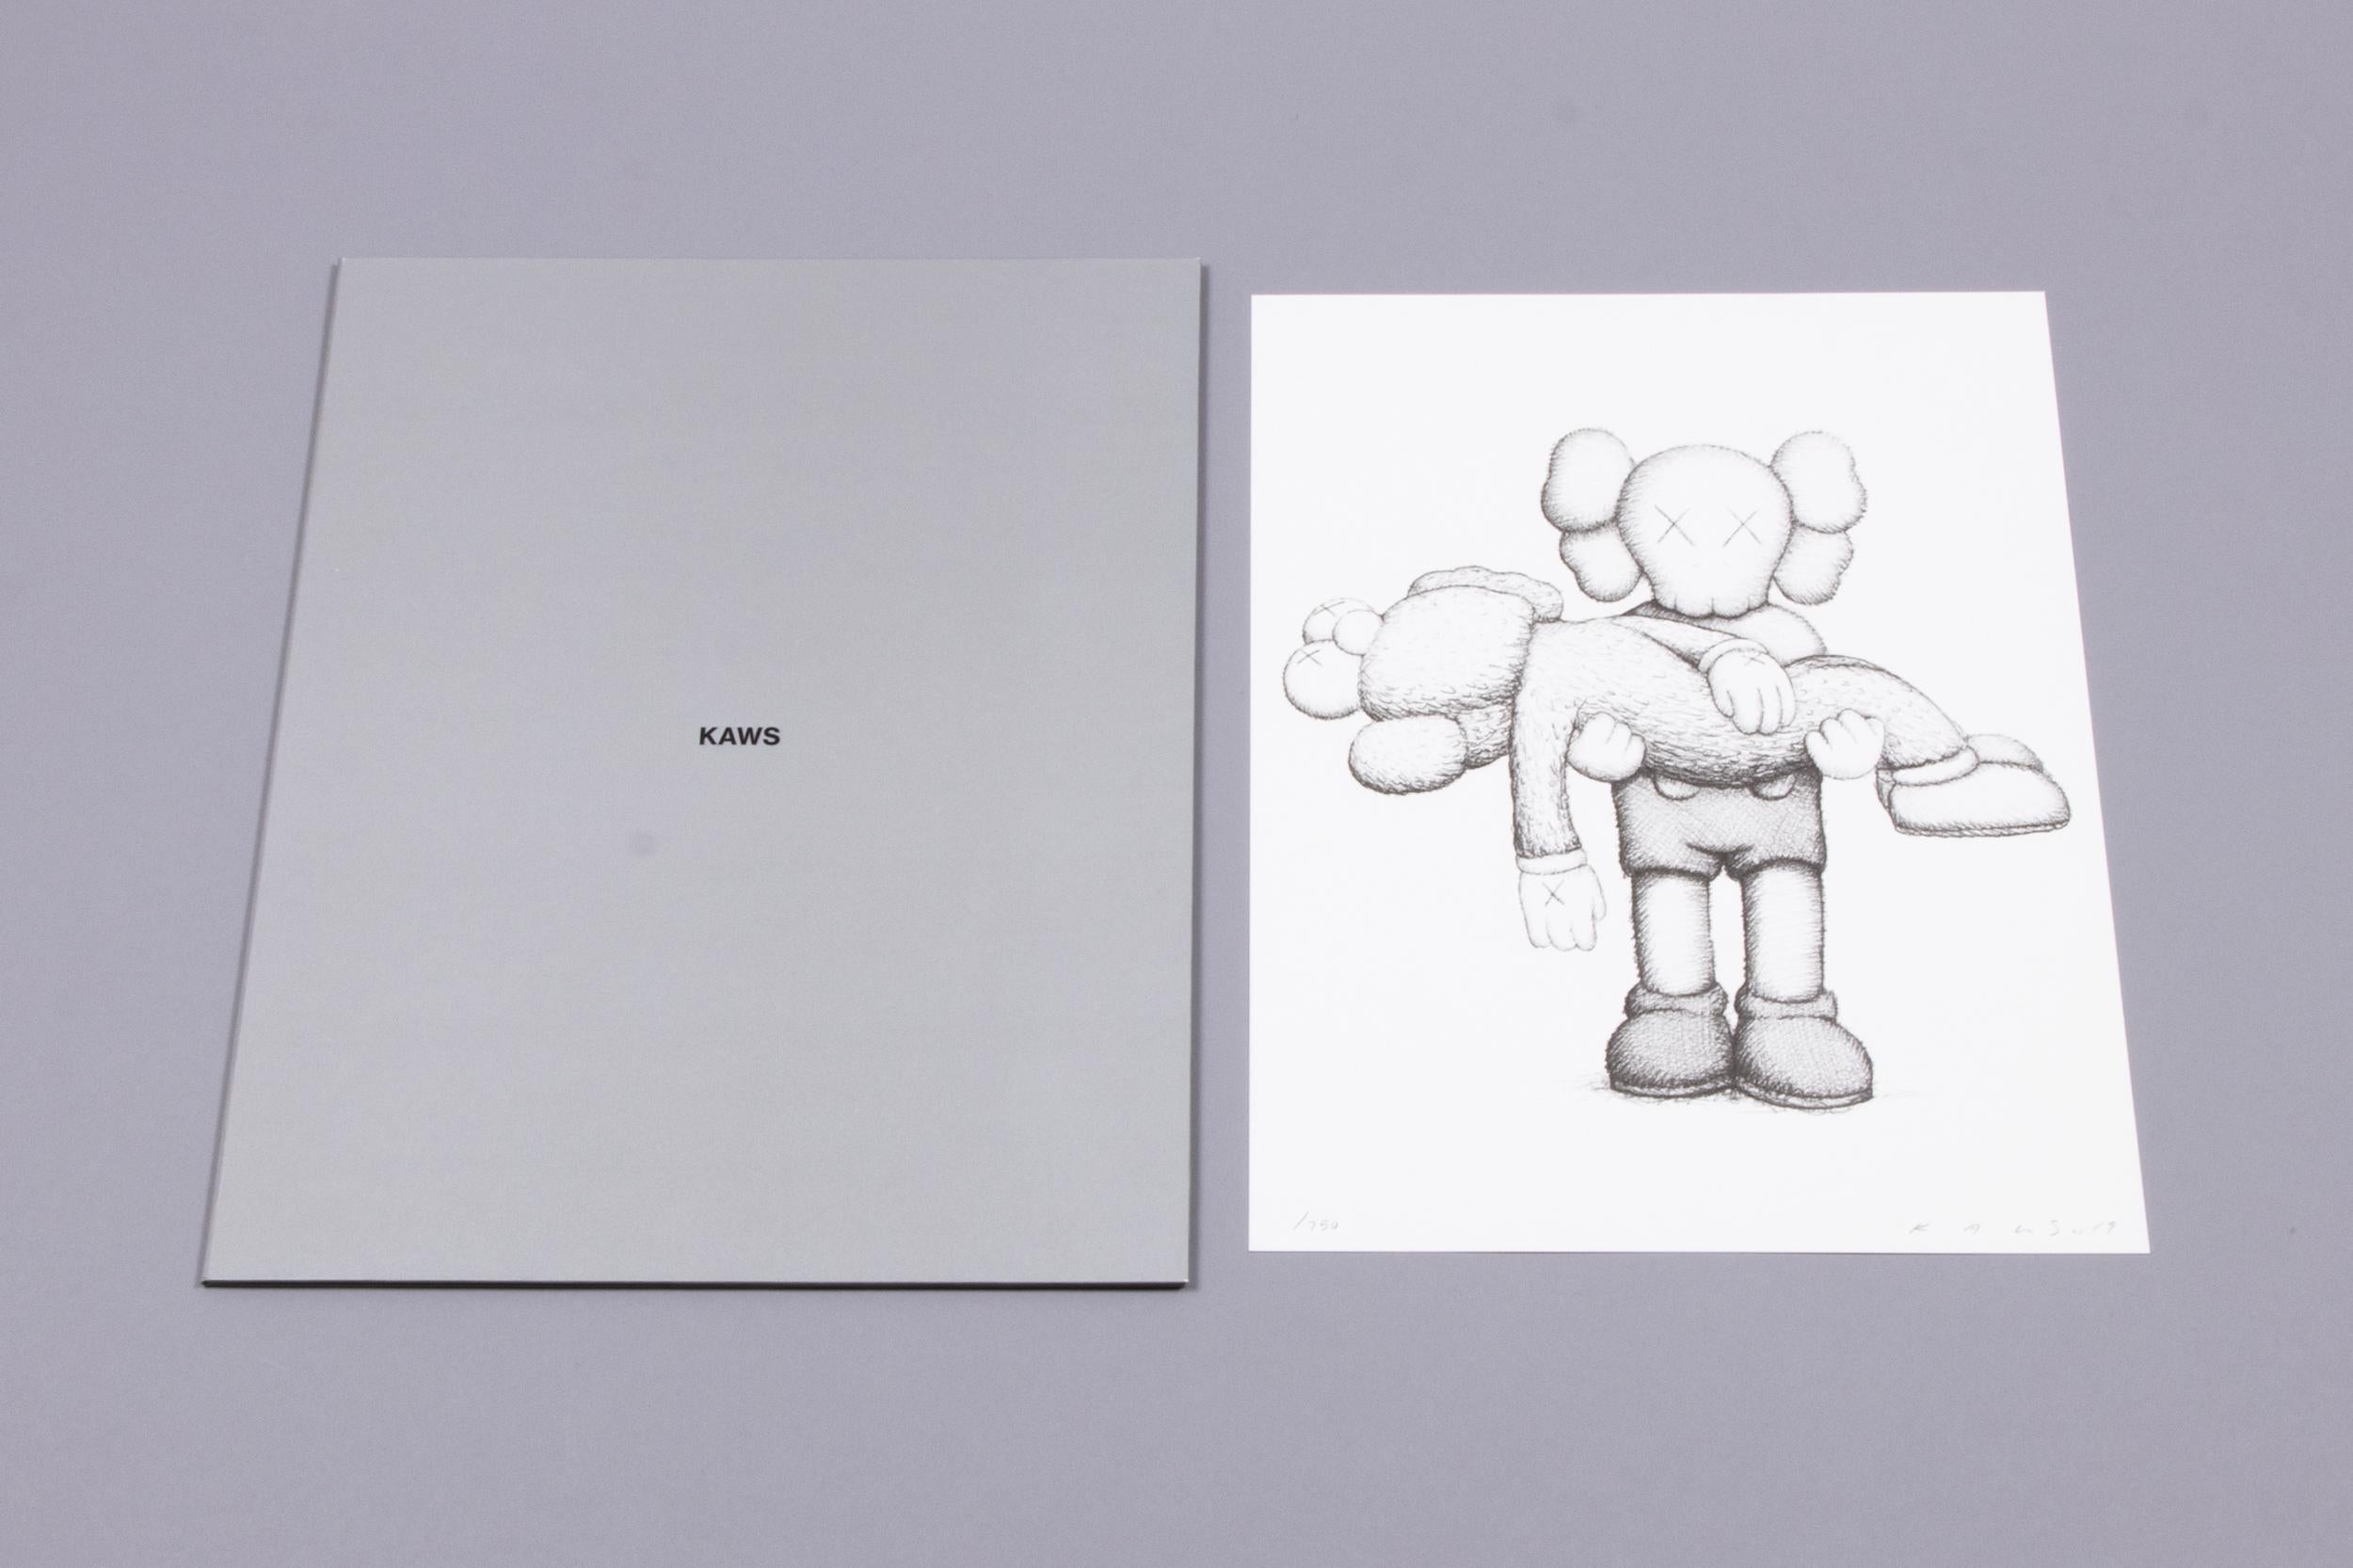 KAWS, Gone - Screenprint incl. Limited Edition Catalogue, Signed Print 3